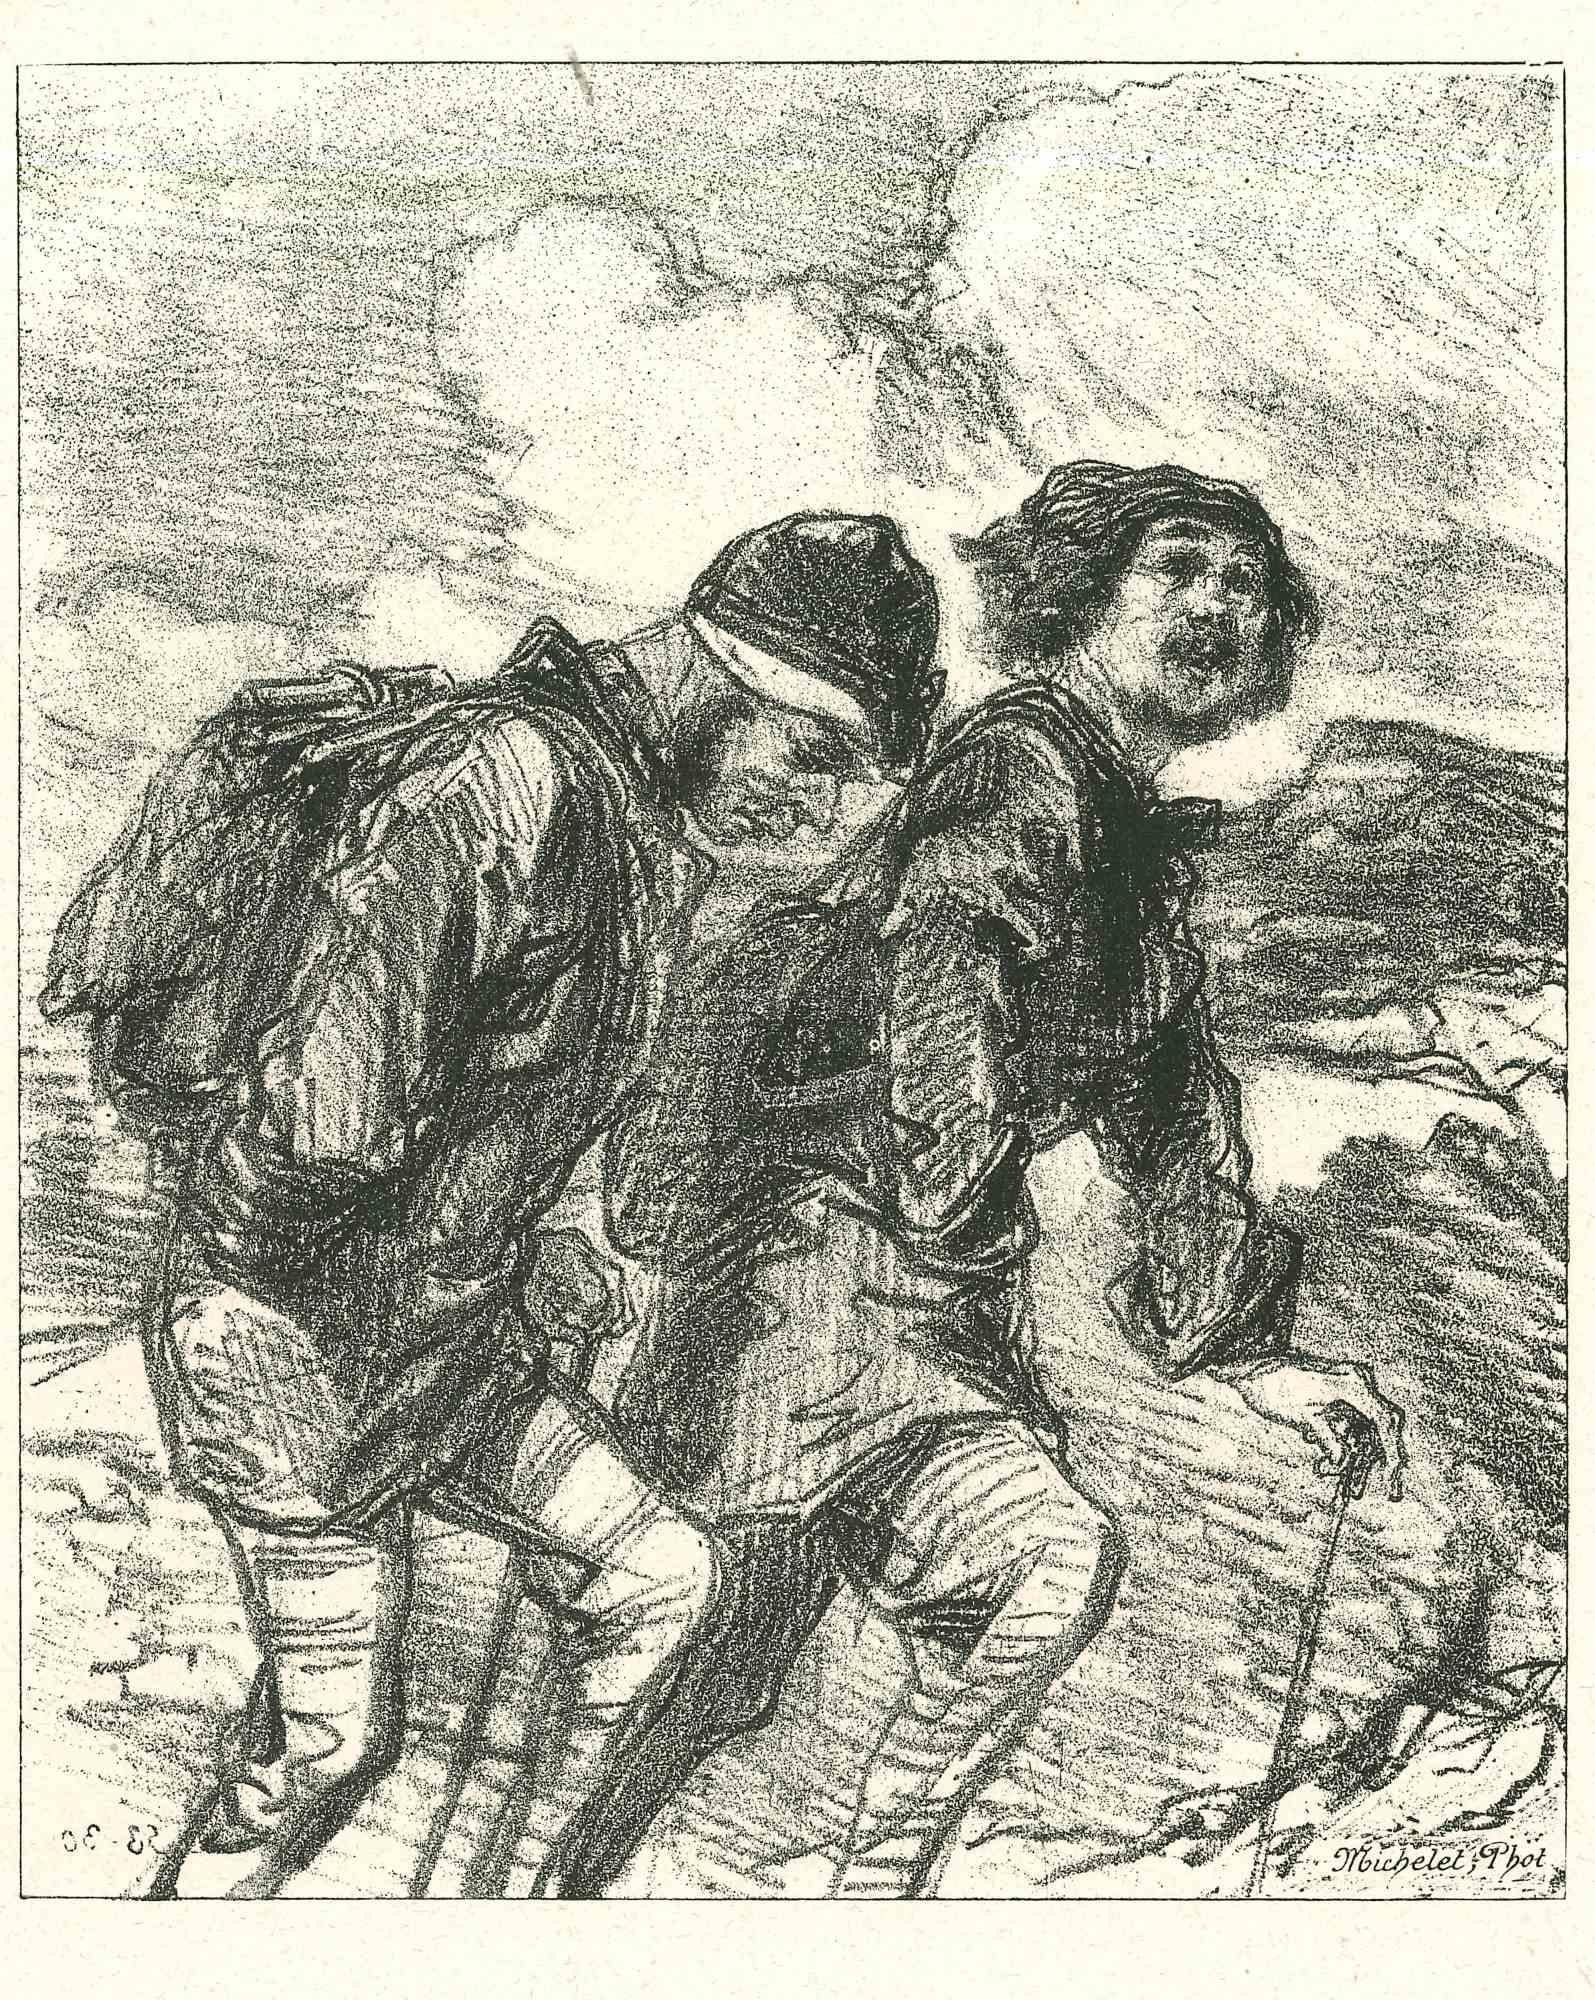 The Mountaineers is an original lithograph on ivory-colored paper, realized by the French draftsman Paul Gavarni (after) (alias Guillaume Sulpice Chevalier Gavarni, 1804-1866) in Paris, 1881, in the collection of Illustrations for "La Mascarade